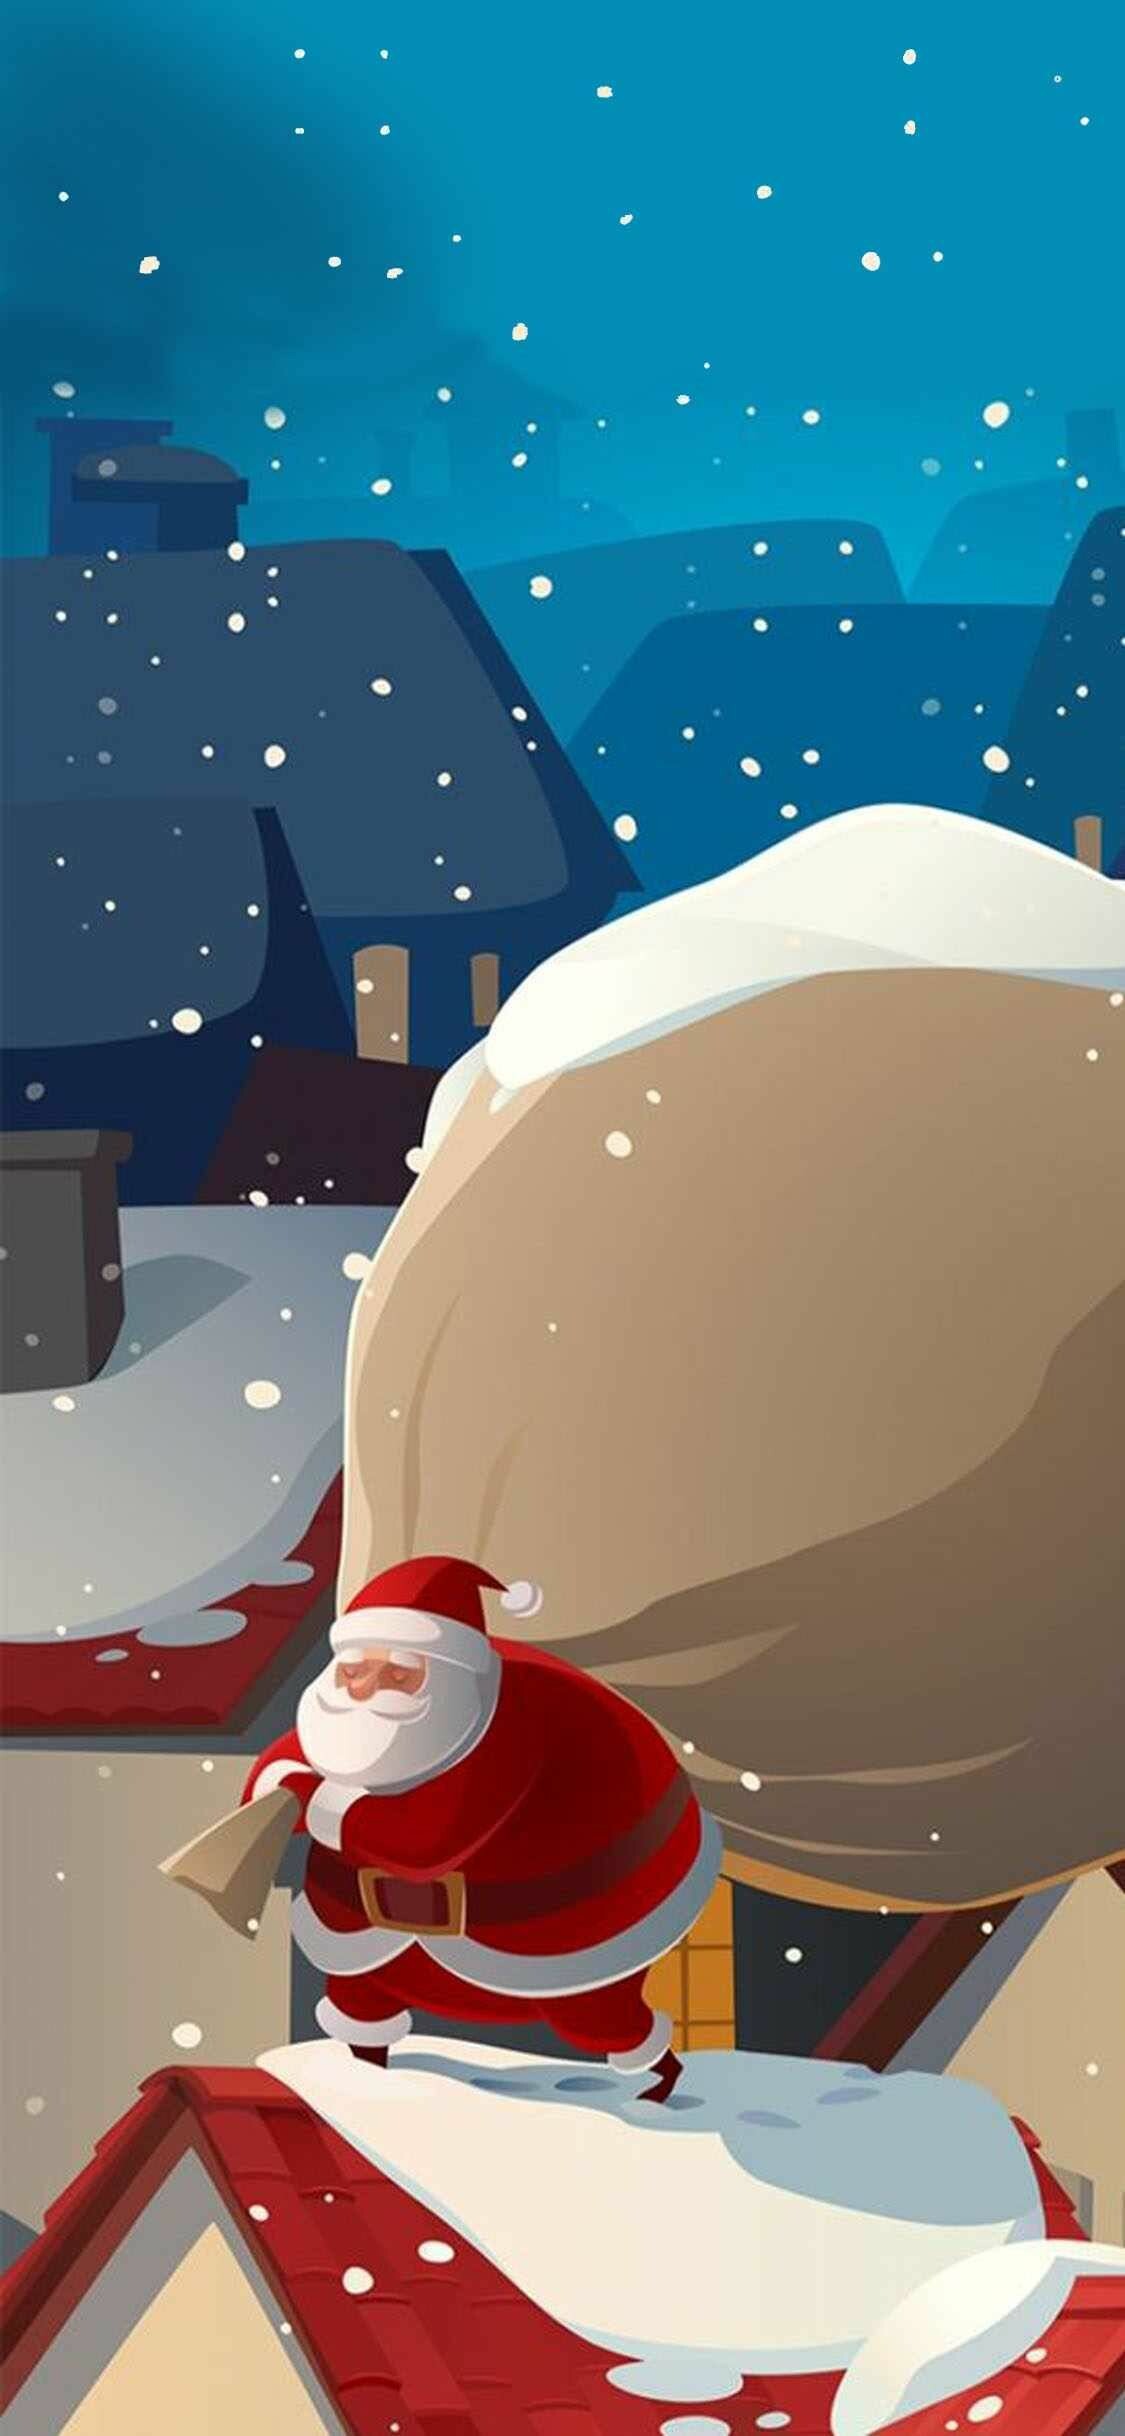 Santa Claus: Brings gifts to well-behaved children on Christmas Eve. 1130x2440 HD Background.